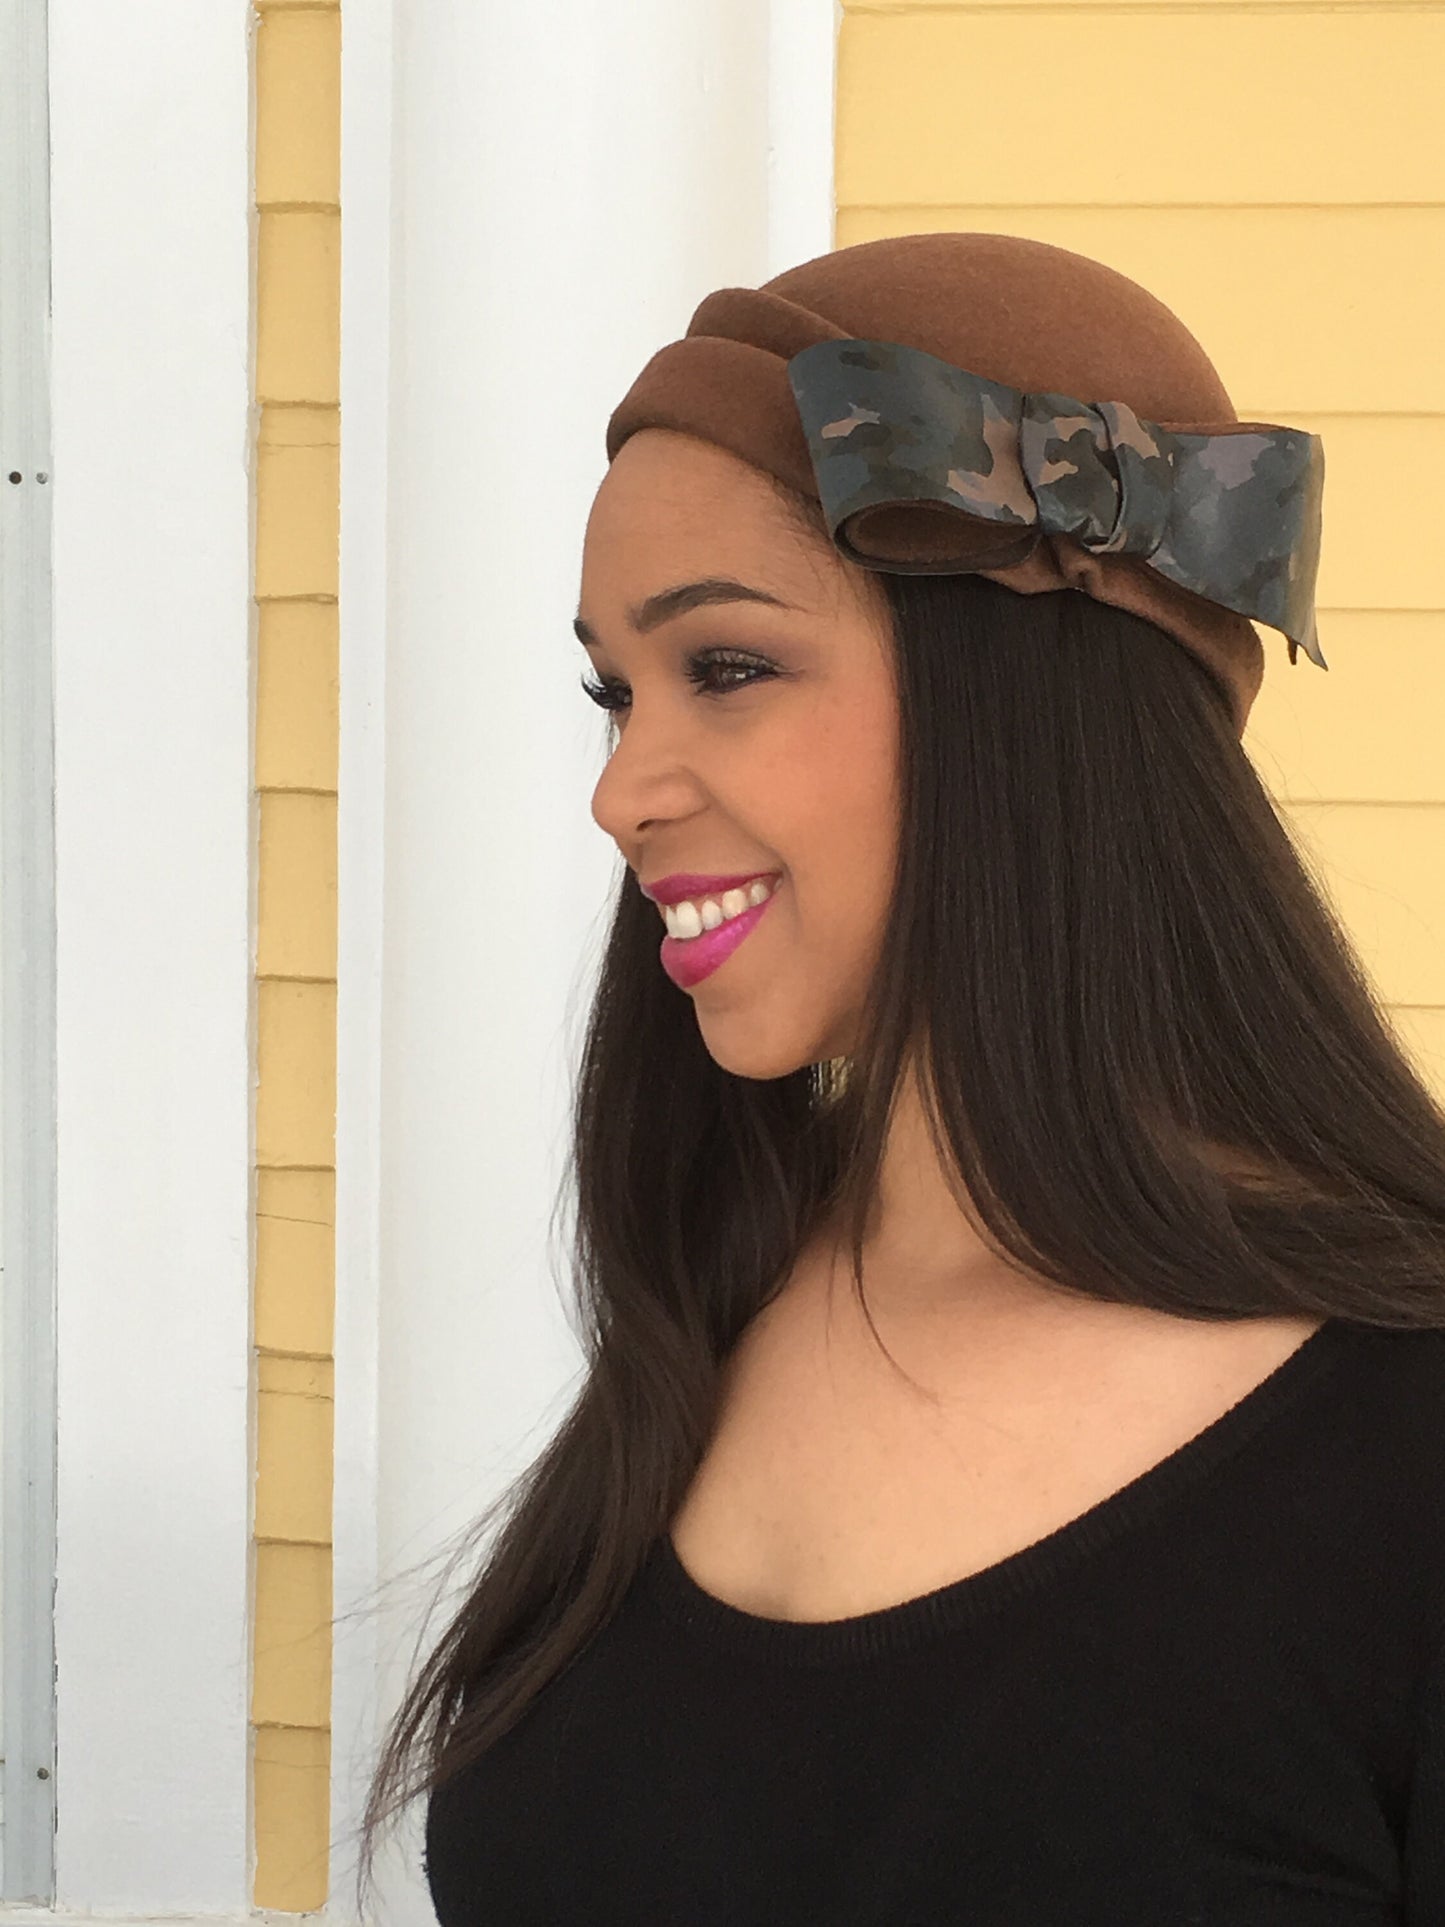 Rich Brown Taupe Wool Felt Sculptured hat with Leather Camouflage Bow. Chic Fall and Winter Hat-Fall Races-Saratoga- Polo Matches-Church Hat